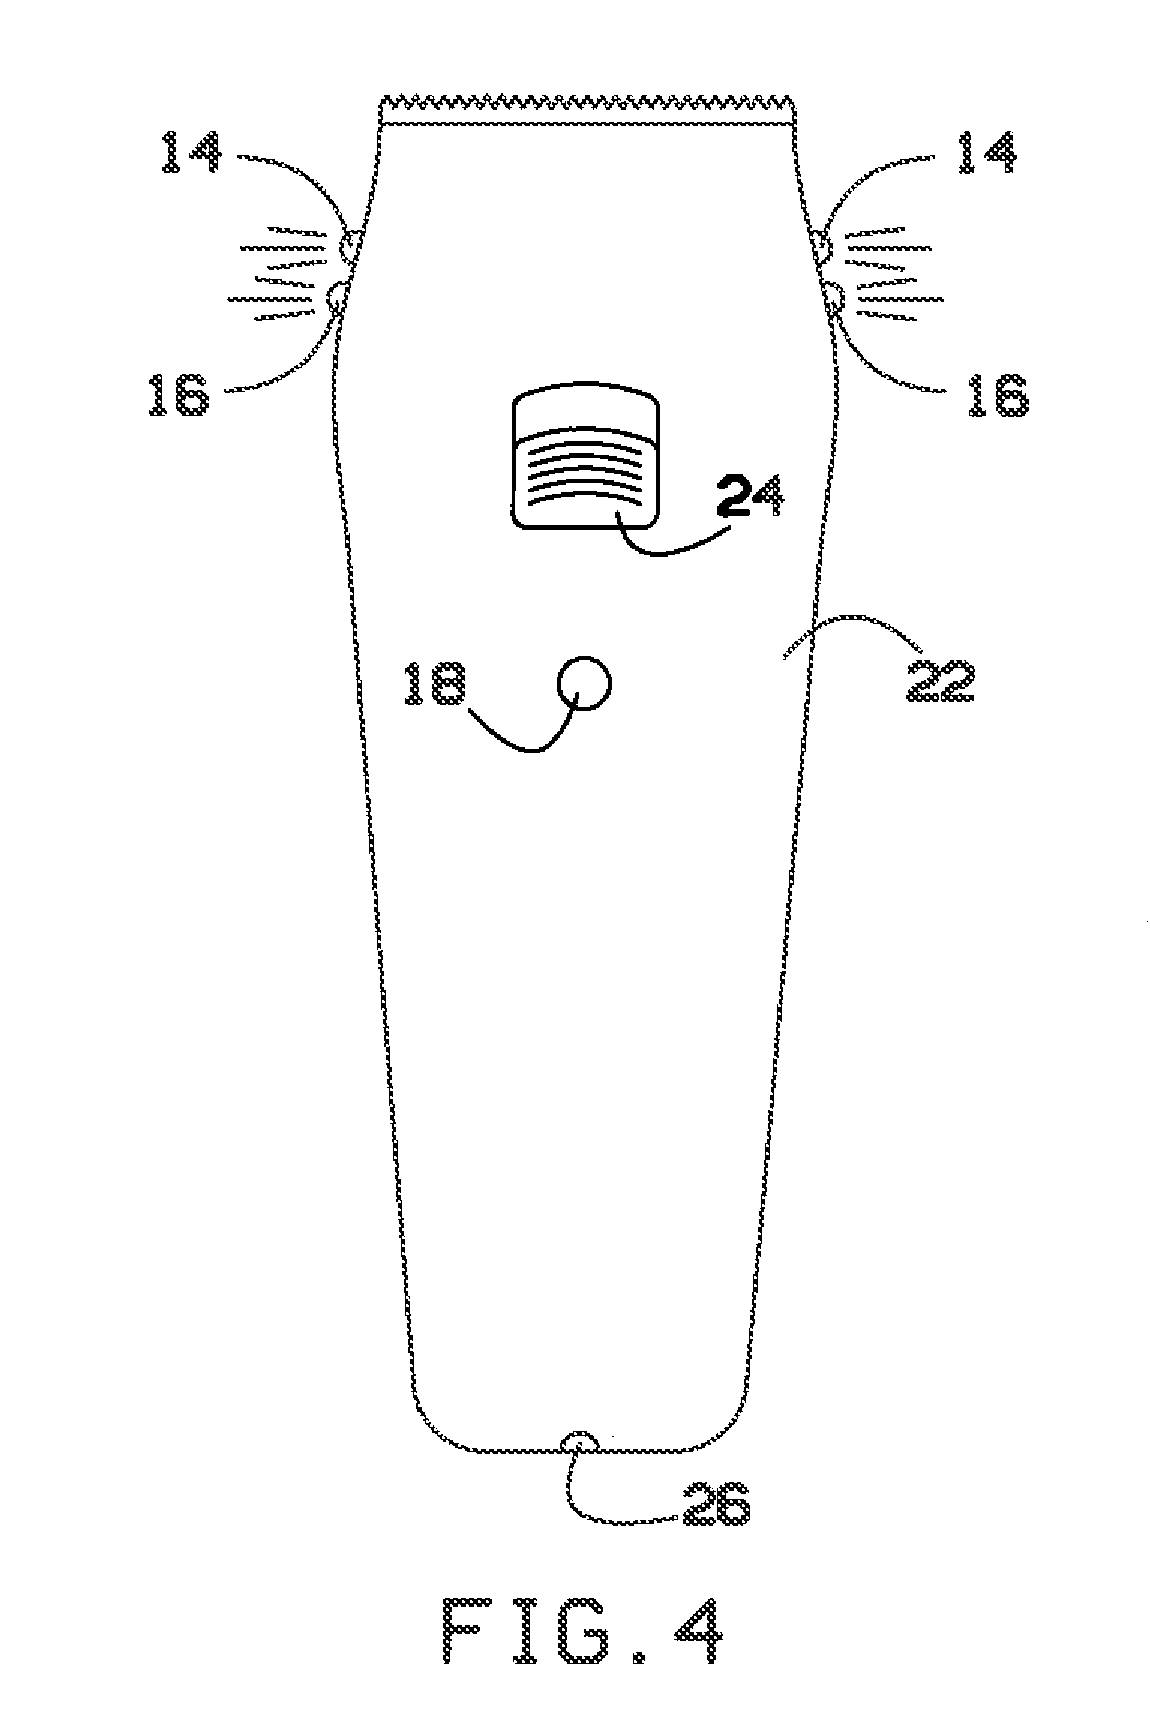 Grooming device with leveling indicators